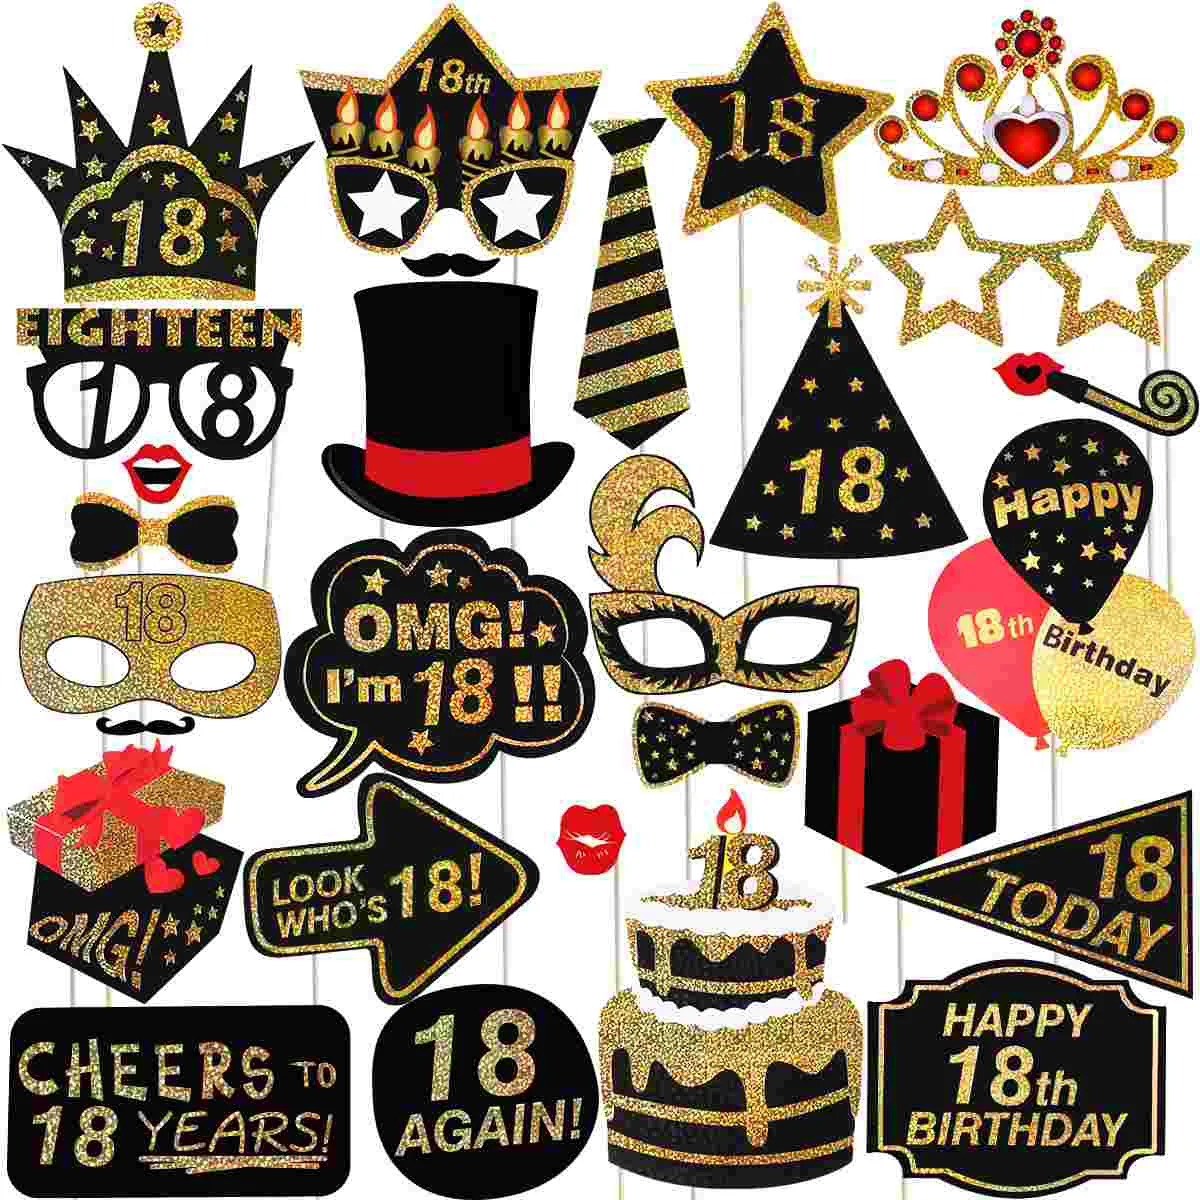 

Tinksky 29 Pcs Glitter 18th Happy Birthday Photo Booth Props Party Accessories for Birthday Party Decoration Favors Supplies